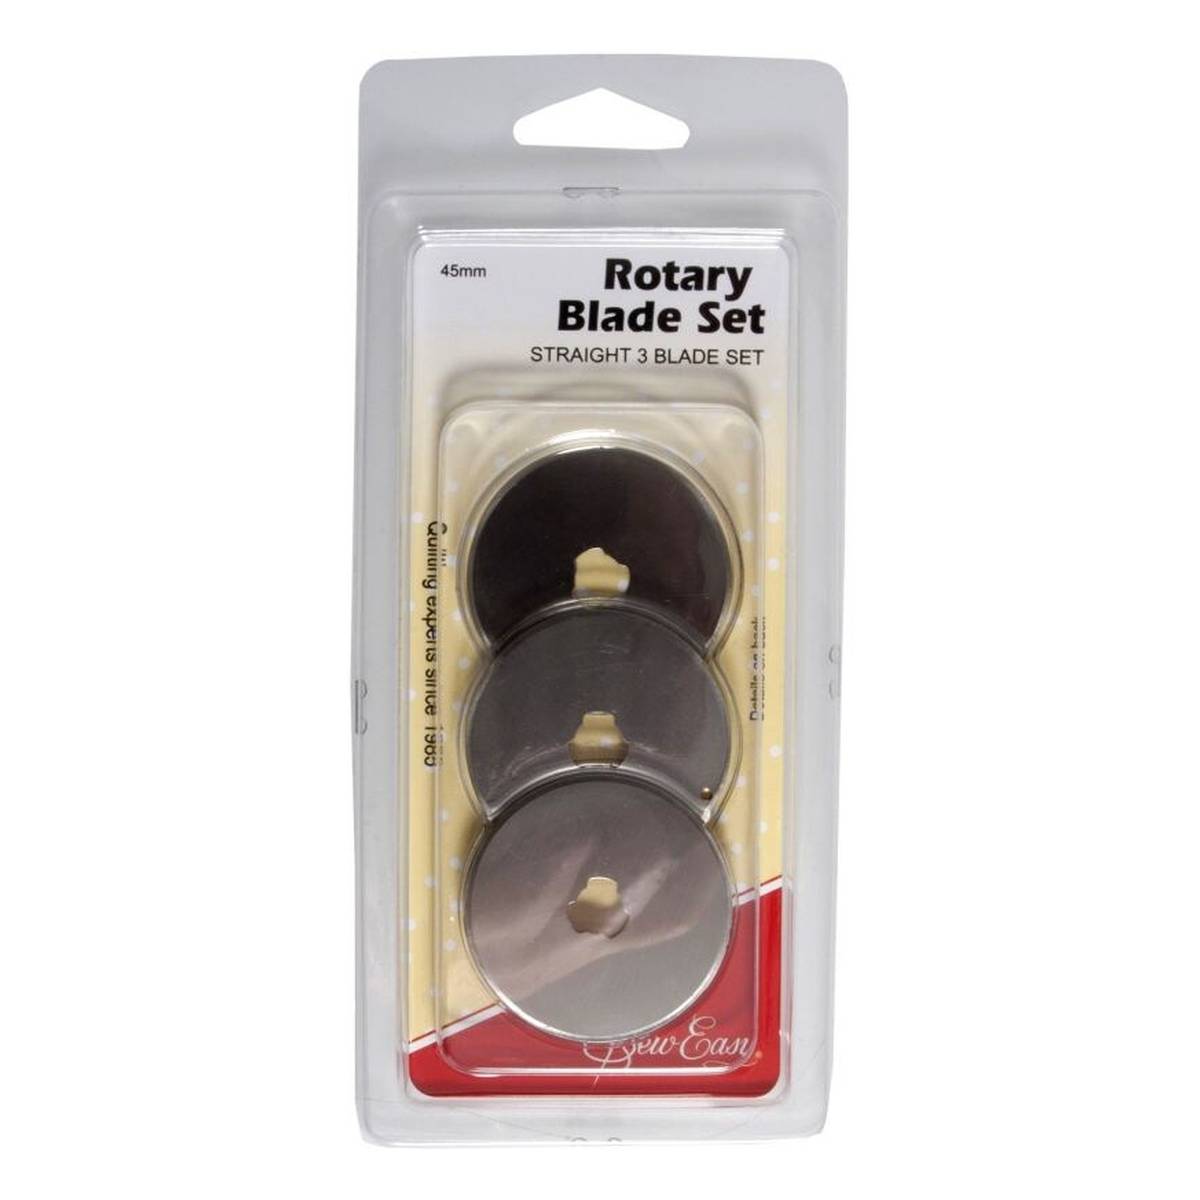 Straight Cut 5 Pack 45mm Rotary Blades, Allary #399